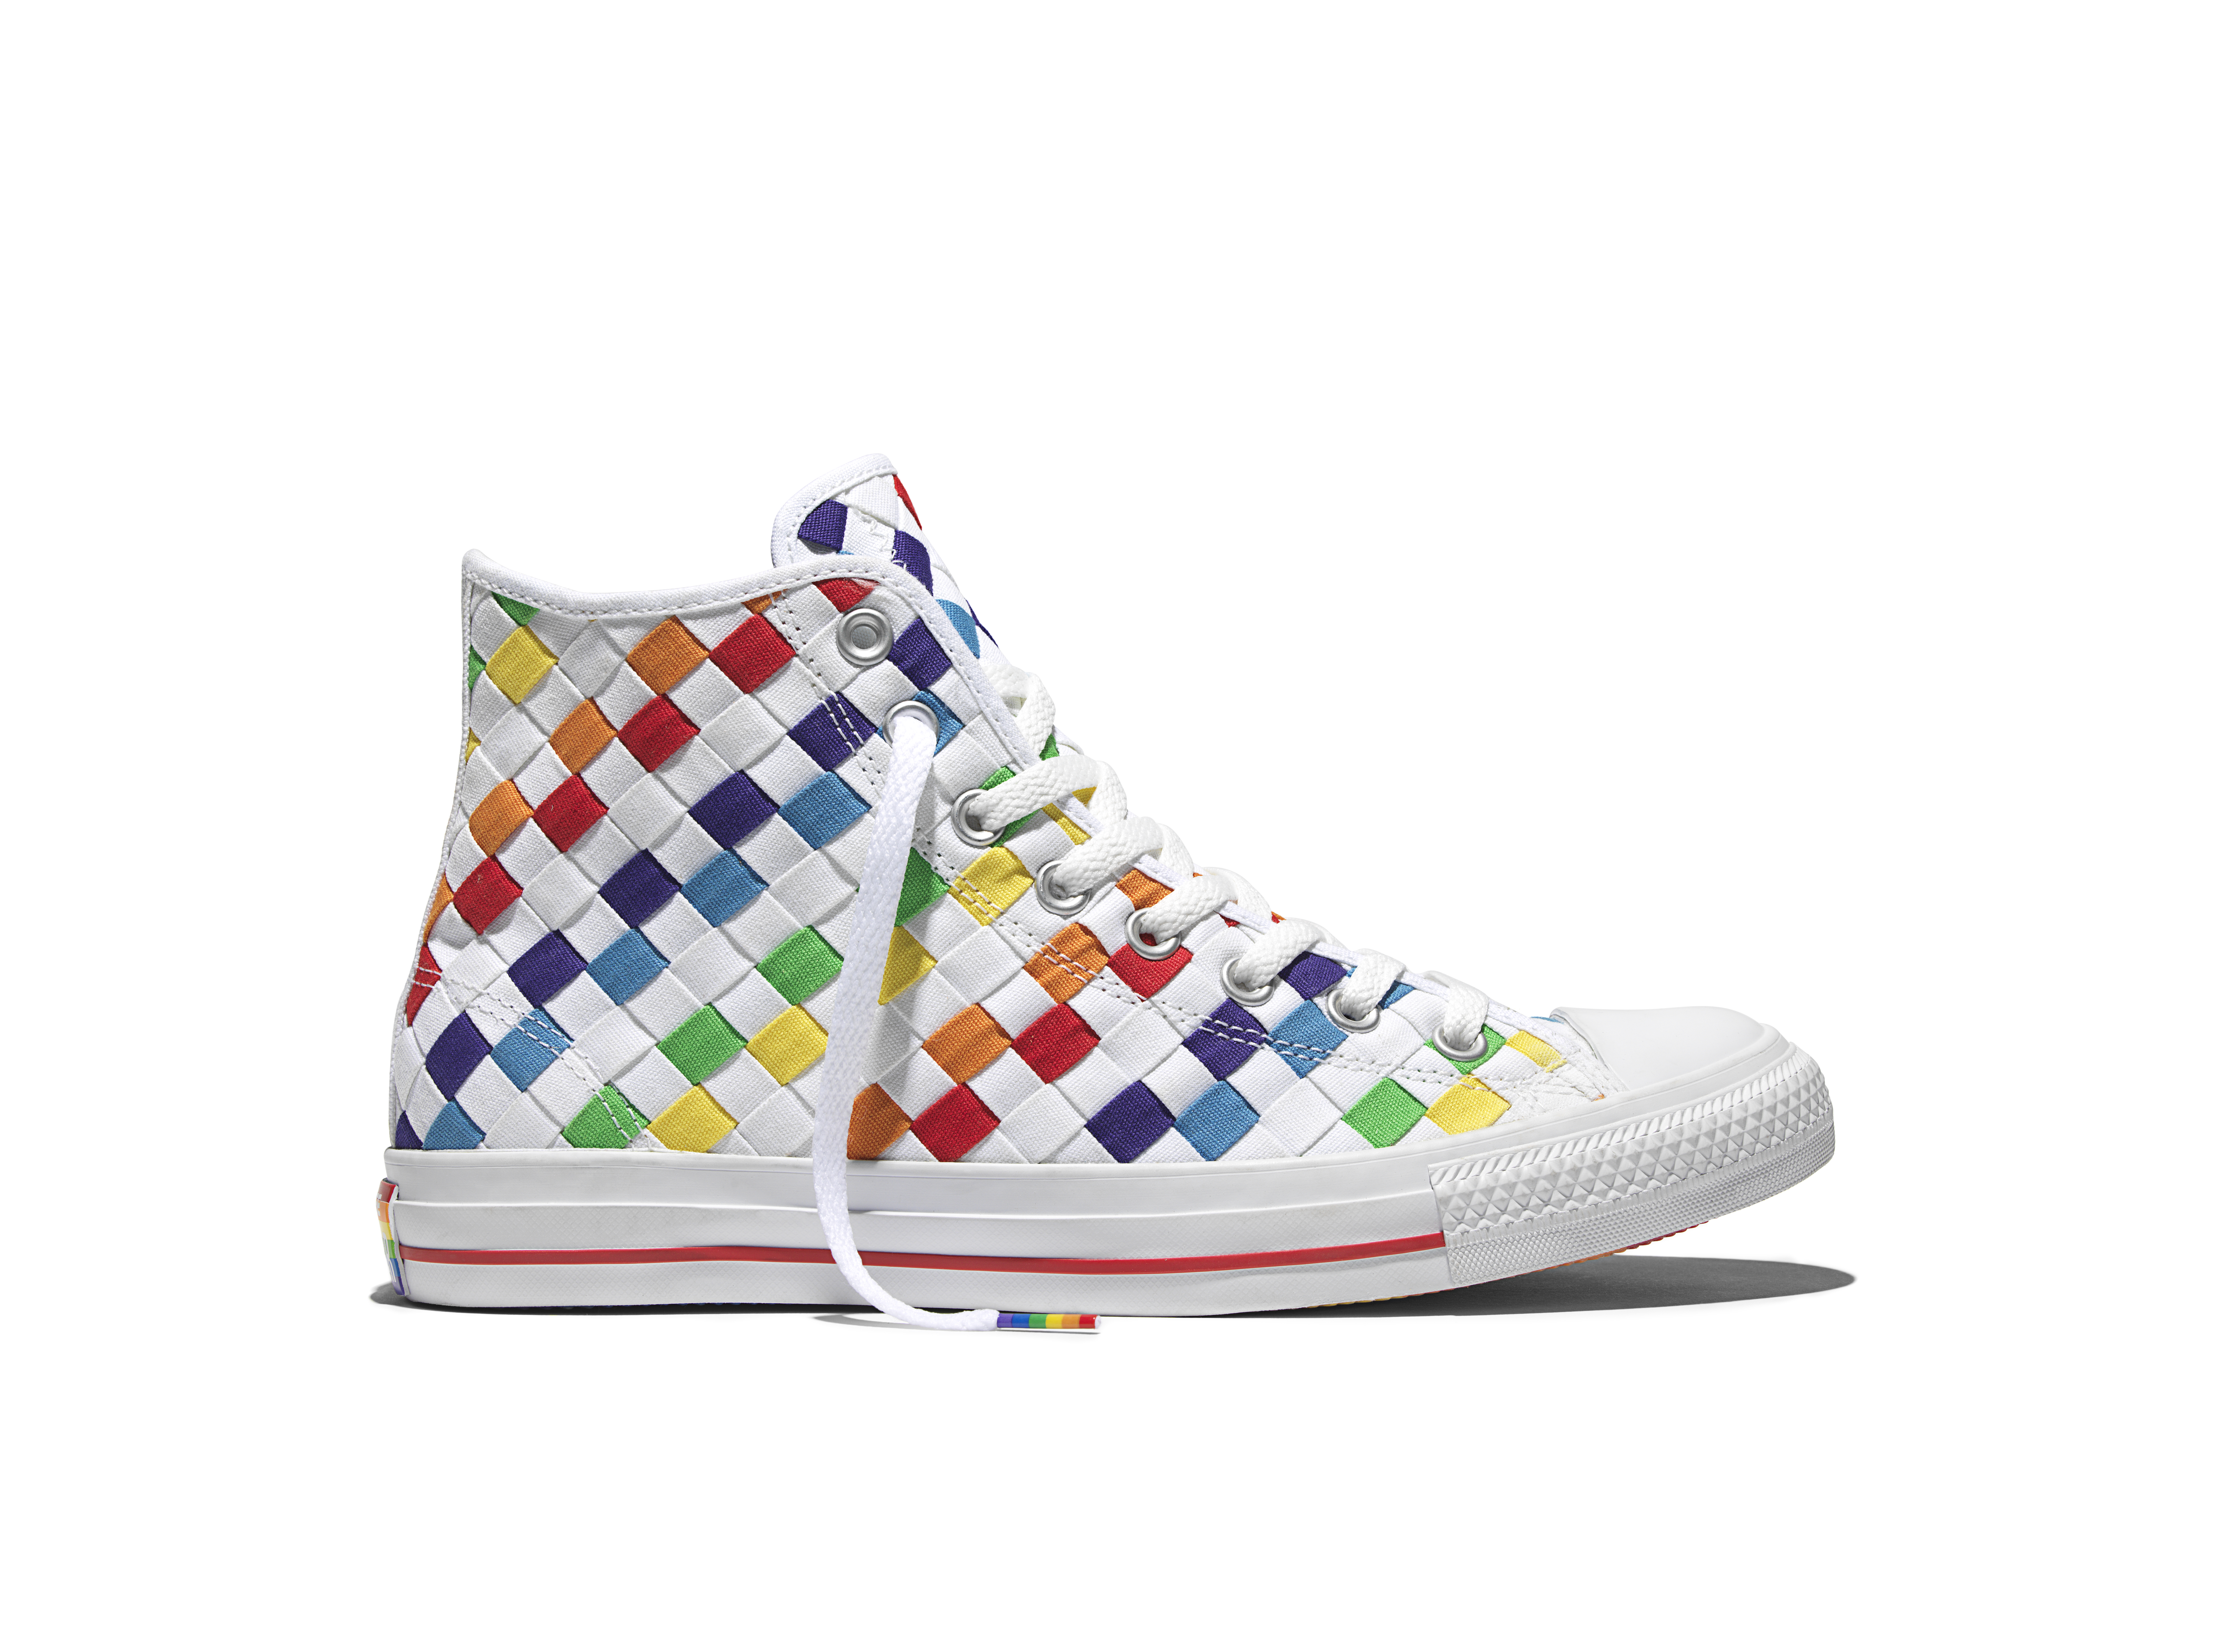 THE 2016 CONVERSE PRIDE COLLECTION CELEBRATES THE CREATIVITY OF ALL ...